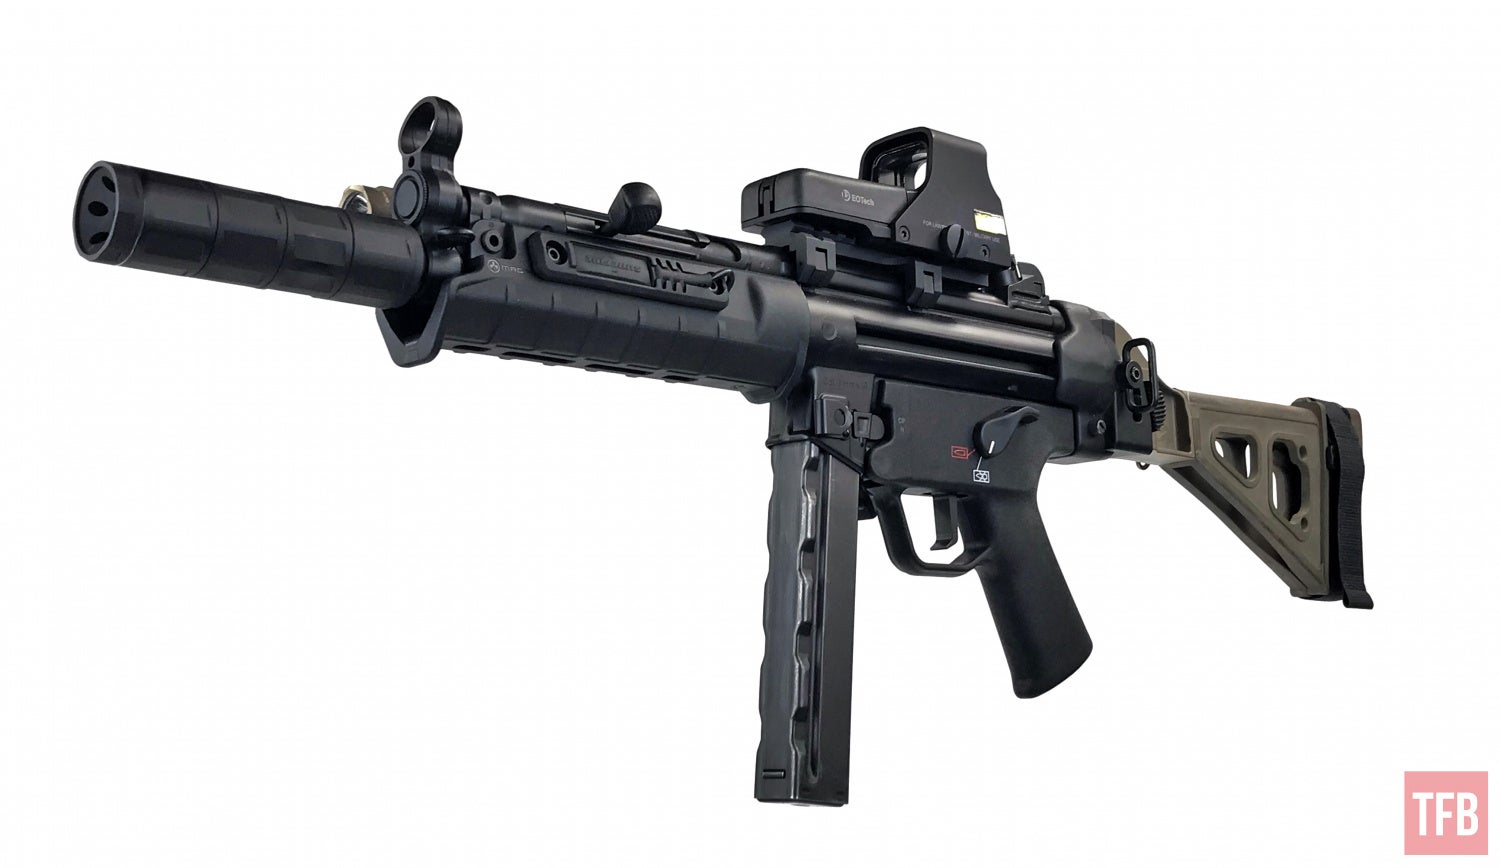 We take a closer look at the Magpul MP5 SL Handguards for the MP5 and MP.....